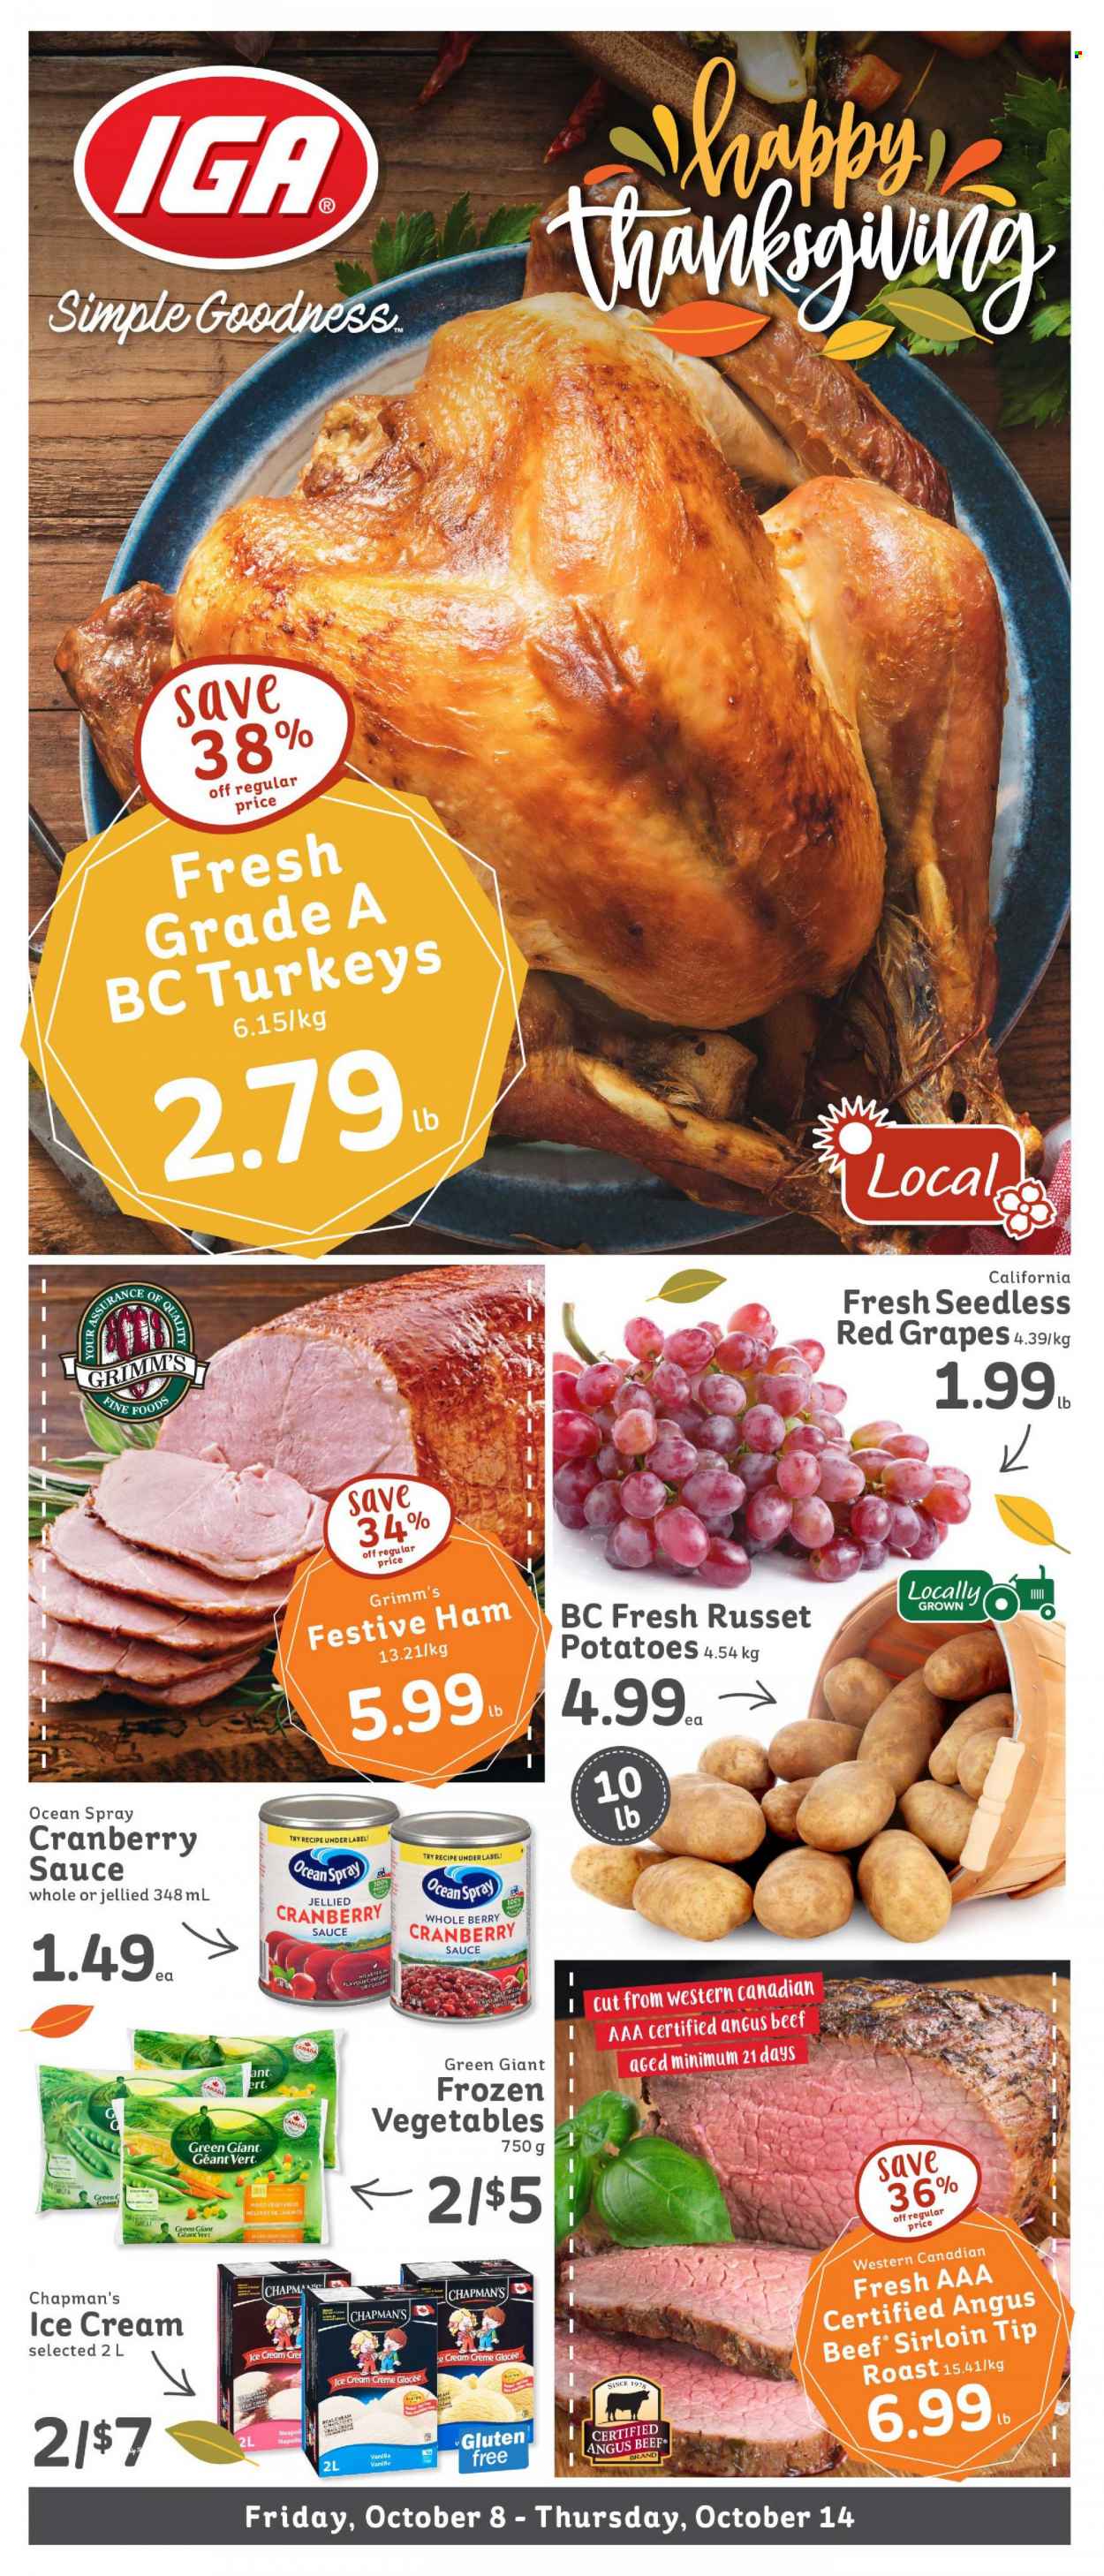 IGA Simple Goodness Flyer - October 08, 2021 - October 14, 2021 - Sales products - russet potatoes, potatoes, sauce, ham, ice cream, frozen vegetables, cranberry sauce, beef meat, beef sirloin. Page 1.